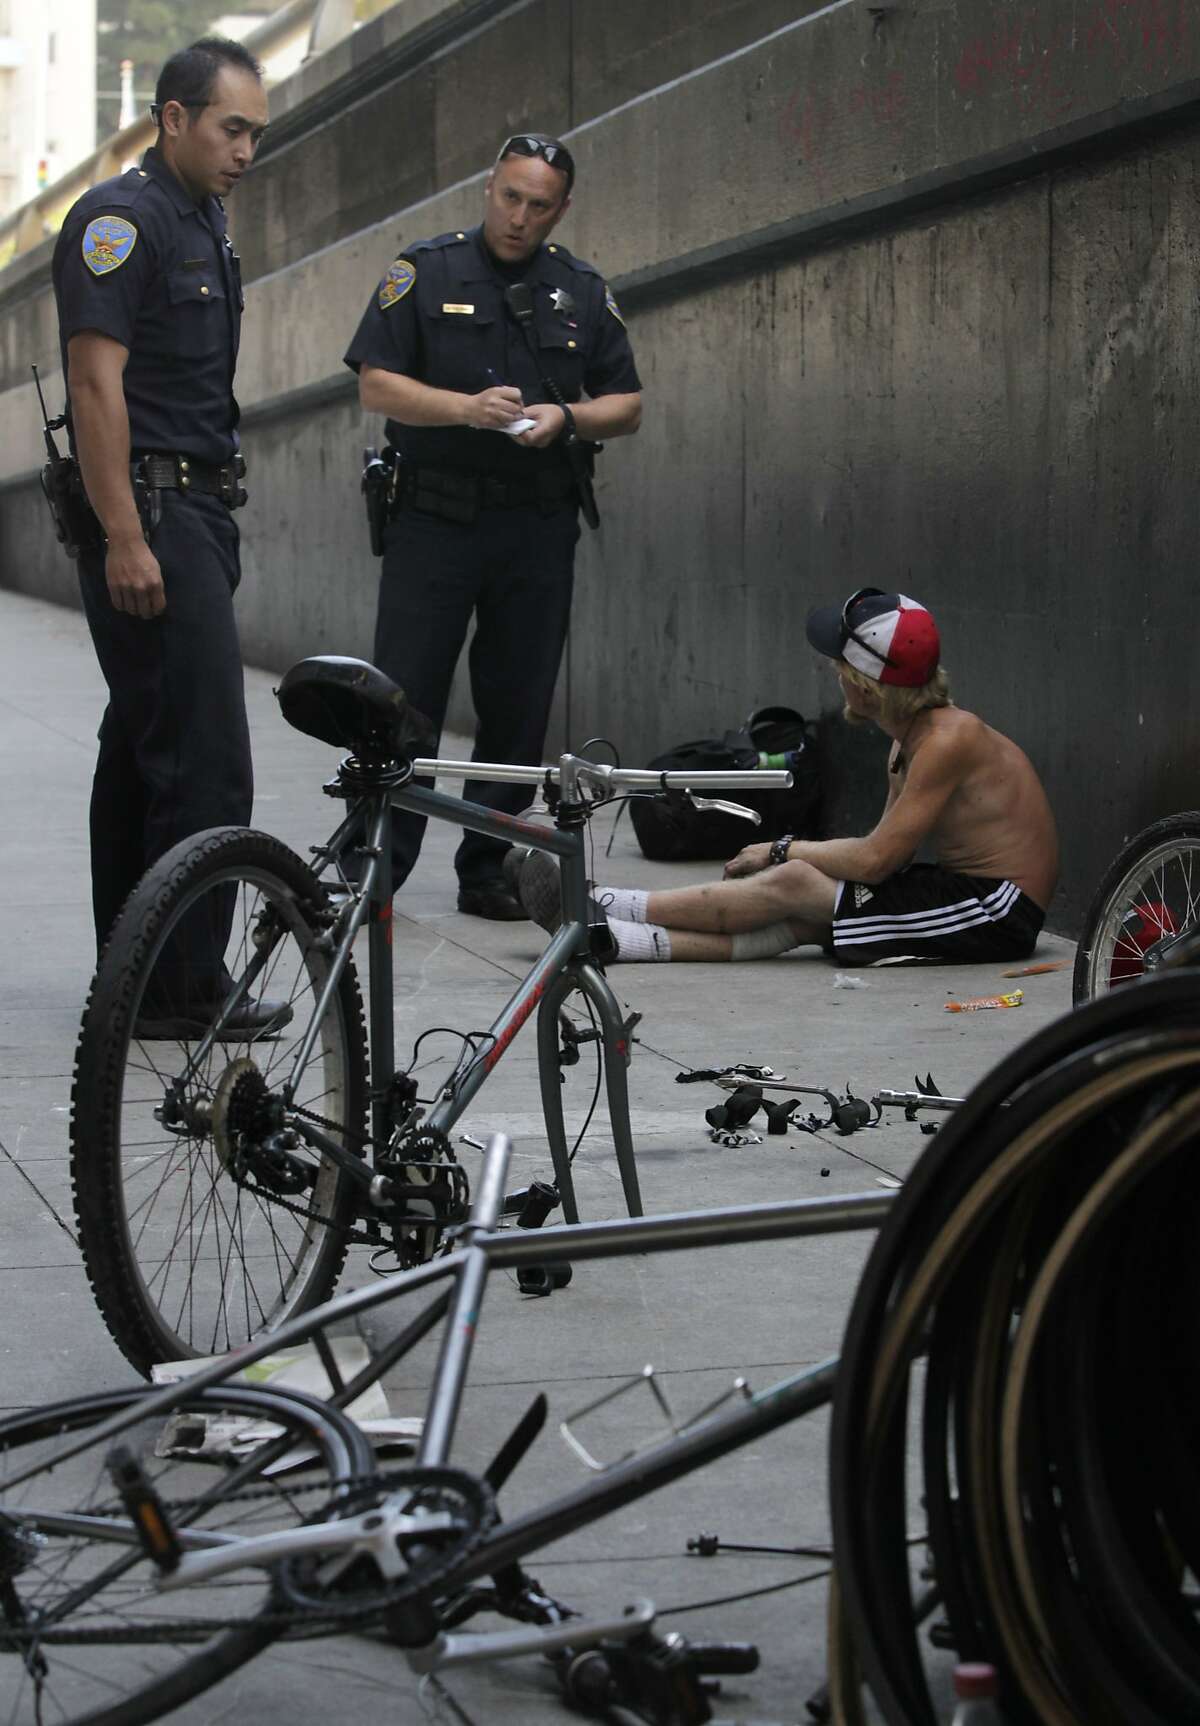 Police officers Gary Cheng (left) and Matt Friedman question an unidentified man about a bicycle he was dismantling below the Central Freeway on Duboce Avenue in San Francisco, Calif. on Thursday, May 1, 2014. The bicycle was not reported stolen, so the man were released. While police suspect many of the bicycles may be stolen, few arrests are made since owners are reluctant to report them as stolen.